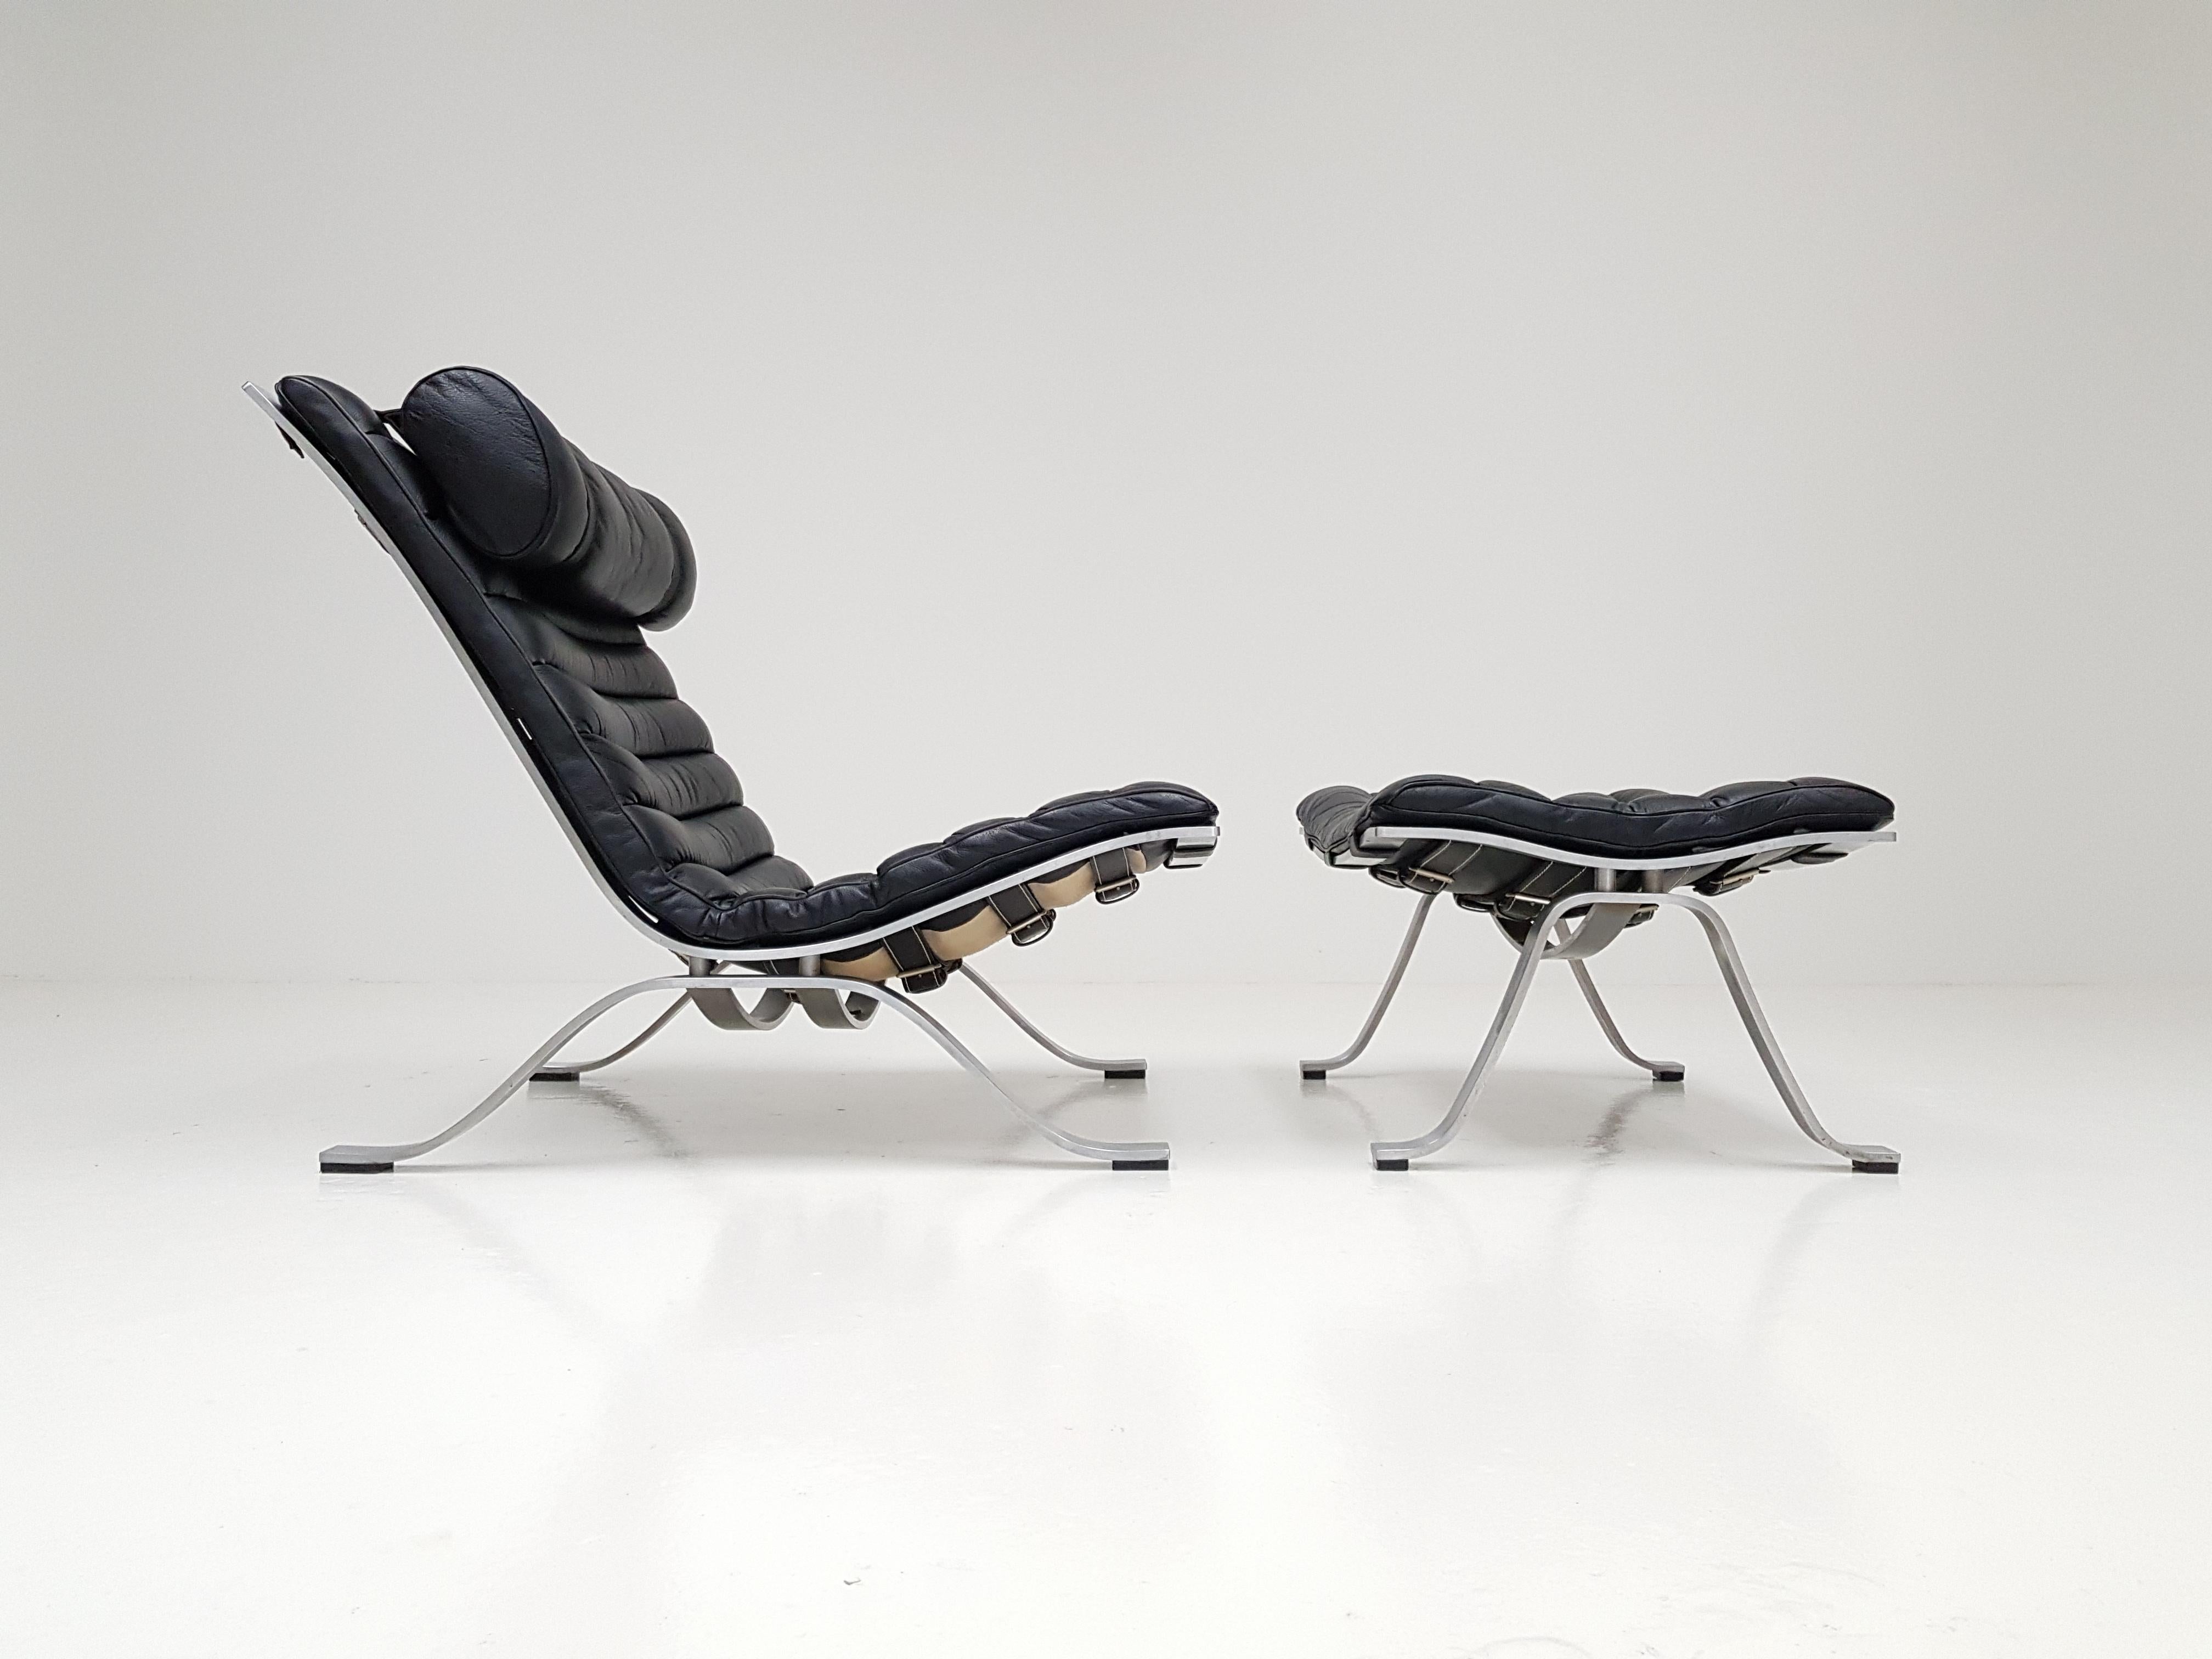 An Arne Norell 'Ari' lounge chair with ottoman designed in 1966 and produced by Norell Mobel. 

Arne Norell (1917–1971) was an Iconic Swedish furniture designer.

The chair sits low and allows for very comfortable reclining. Common with Arne